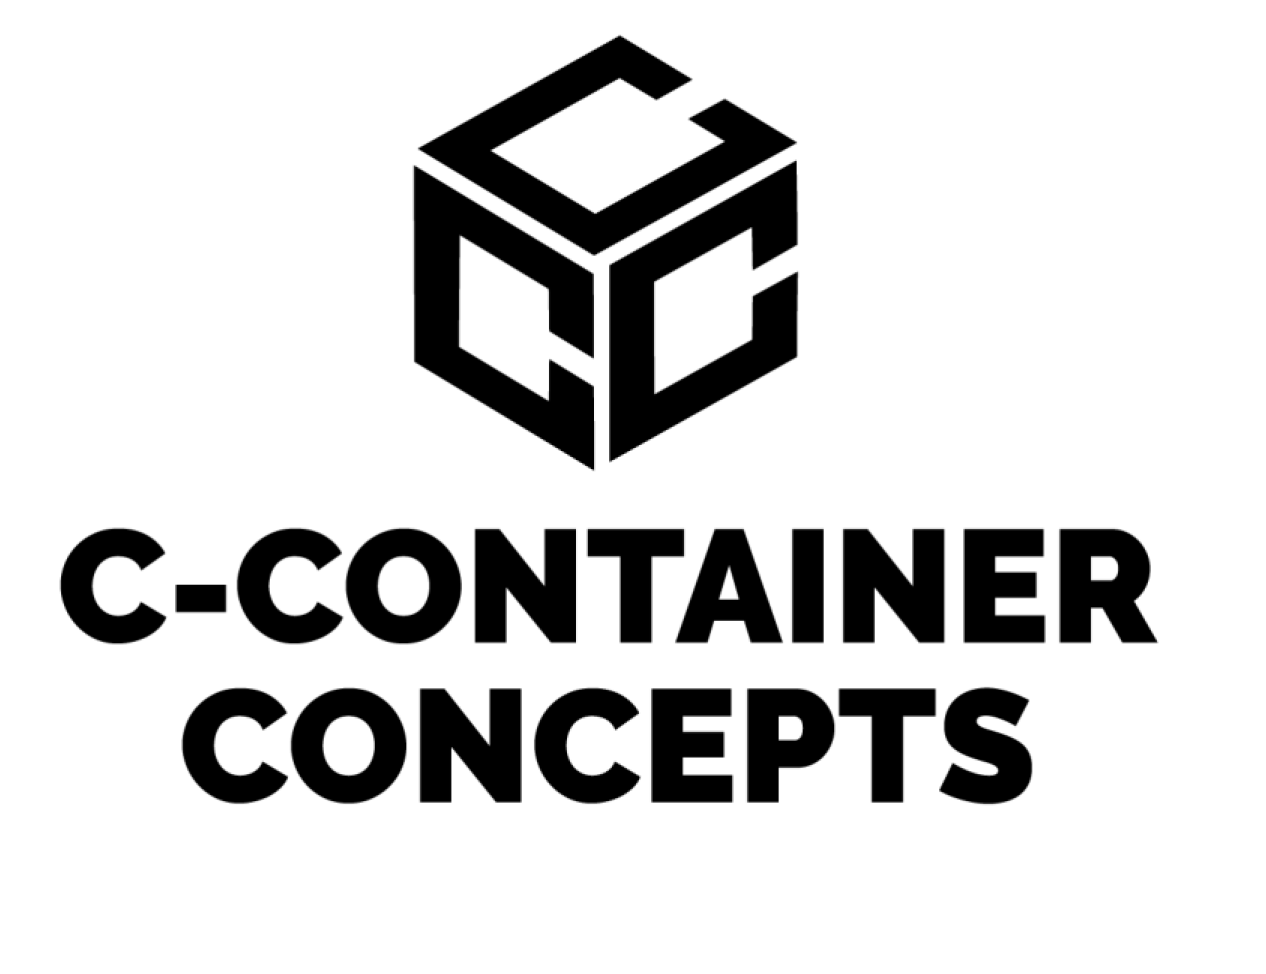 C-Container Concepts Gmbh